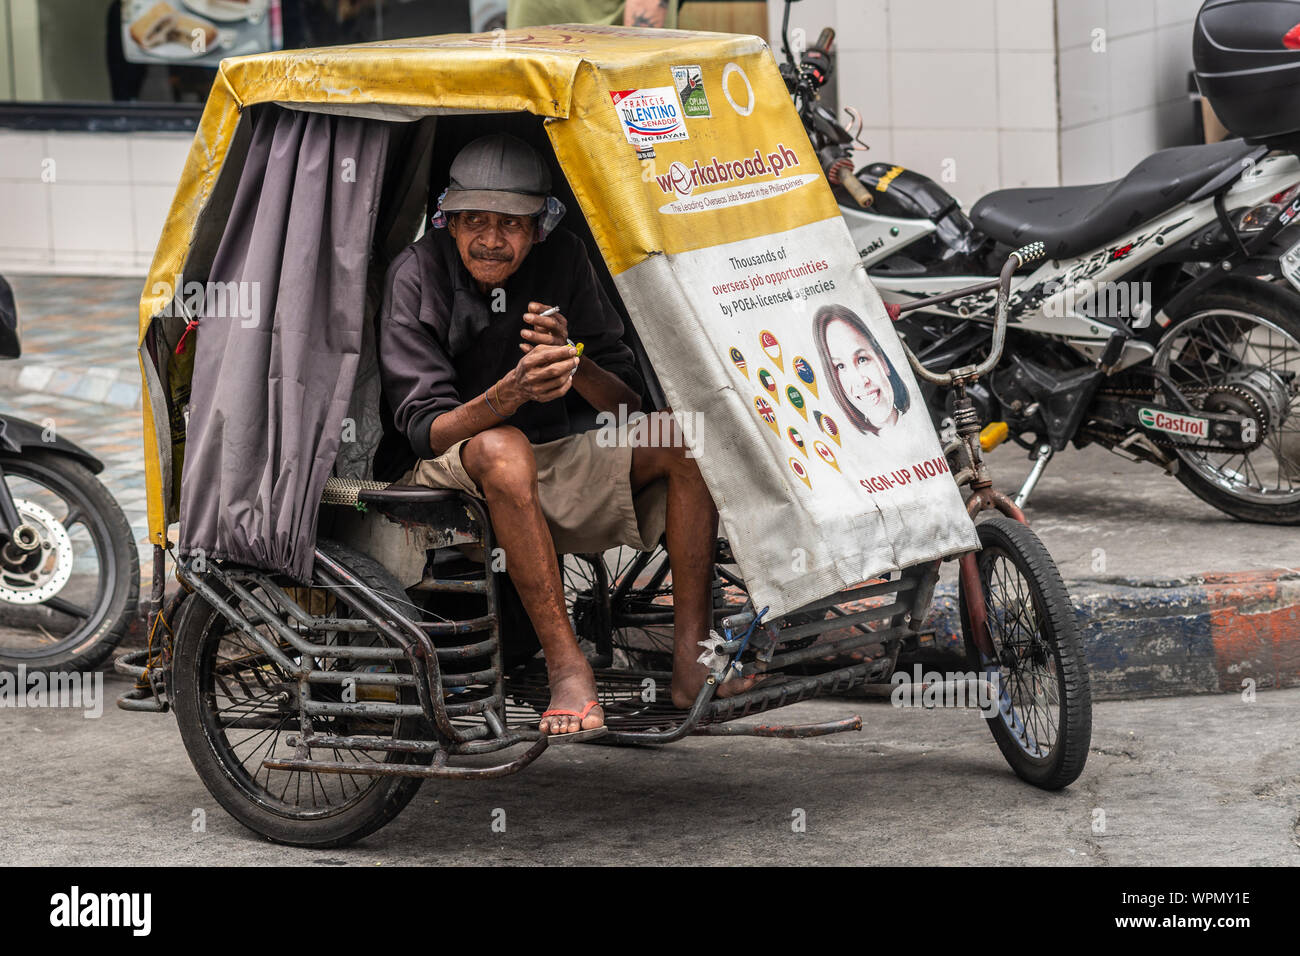 Manila, Philippines - March 5, 2019: Smoking older tricycle cab driver  waits inside his vehicle for customers along street Stock Photo - Alamy